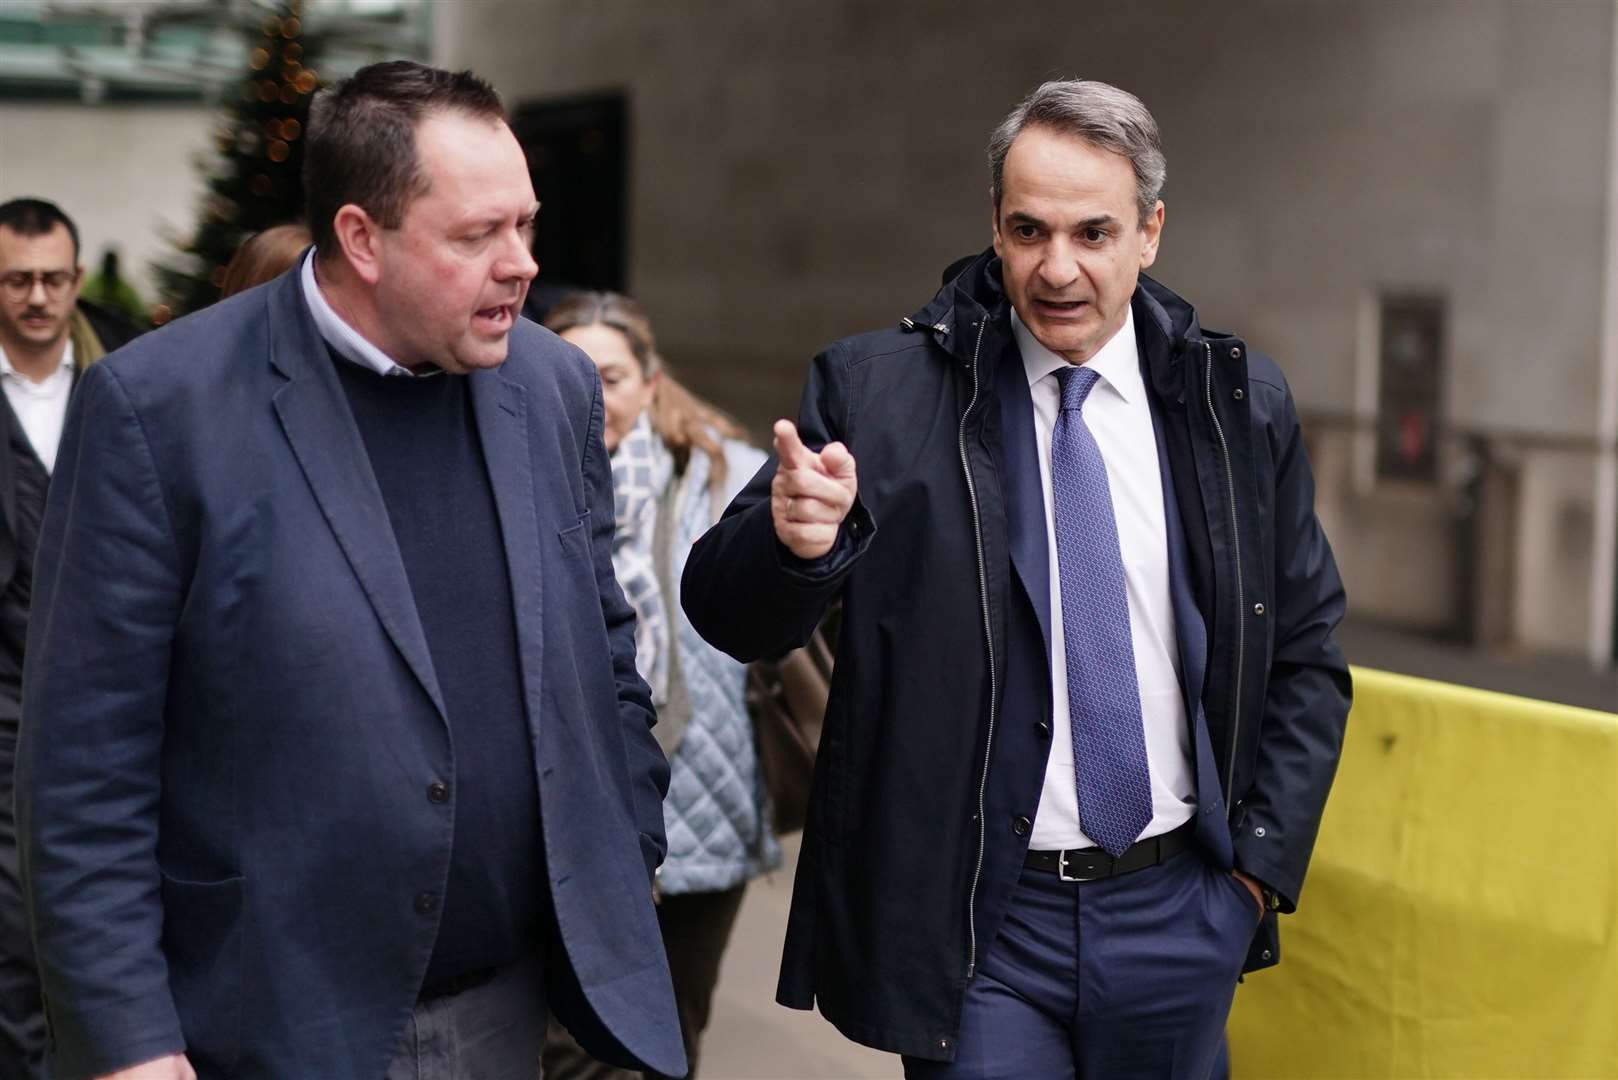 Prime Minister of Greece Kyriakos Mitsotakis made public comments about wanting the Elgin Marbles to be returned ahead of talks with Rishi Sunak (Jordan Pettitt/PA)